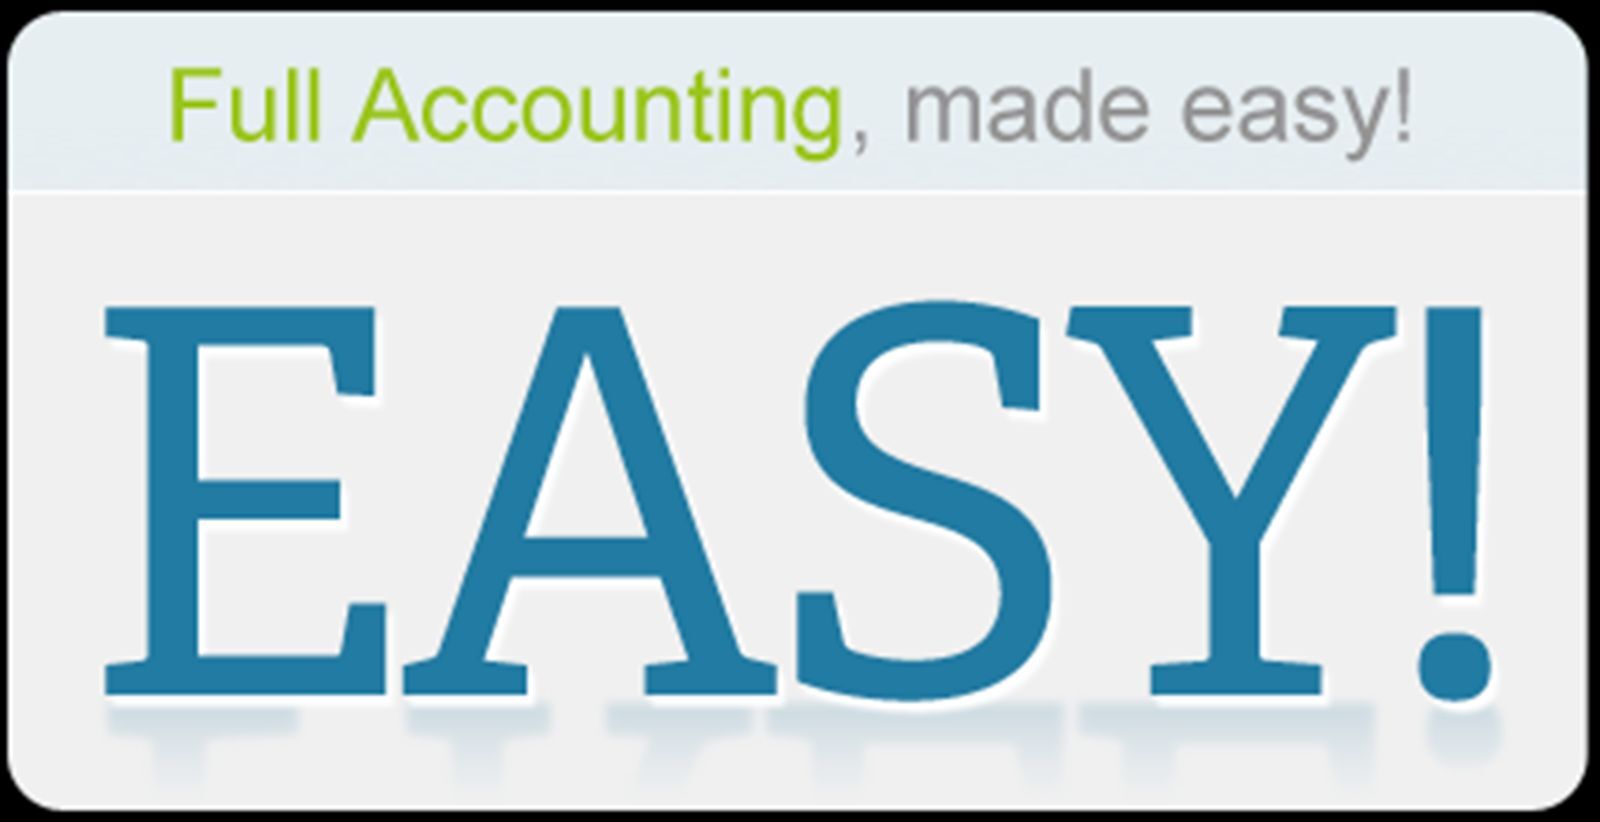 Small Business Accounting Software Record Income and Expense Transactions